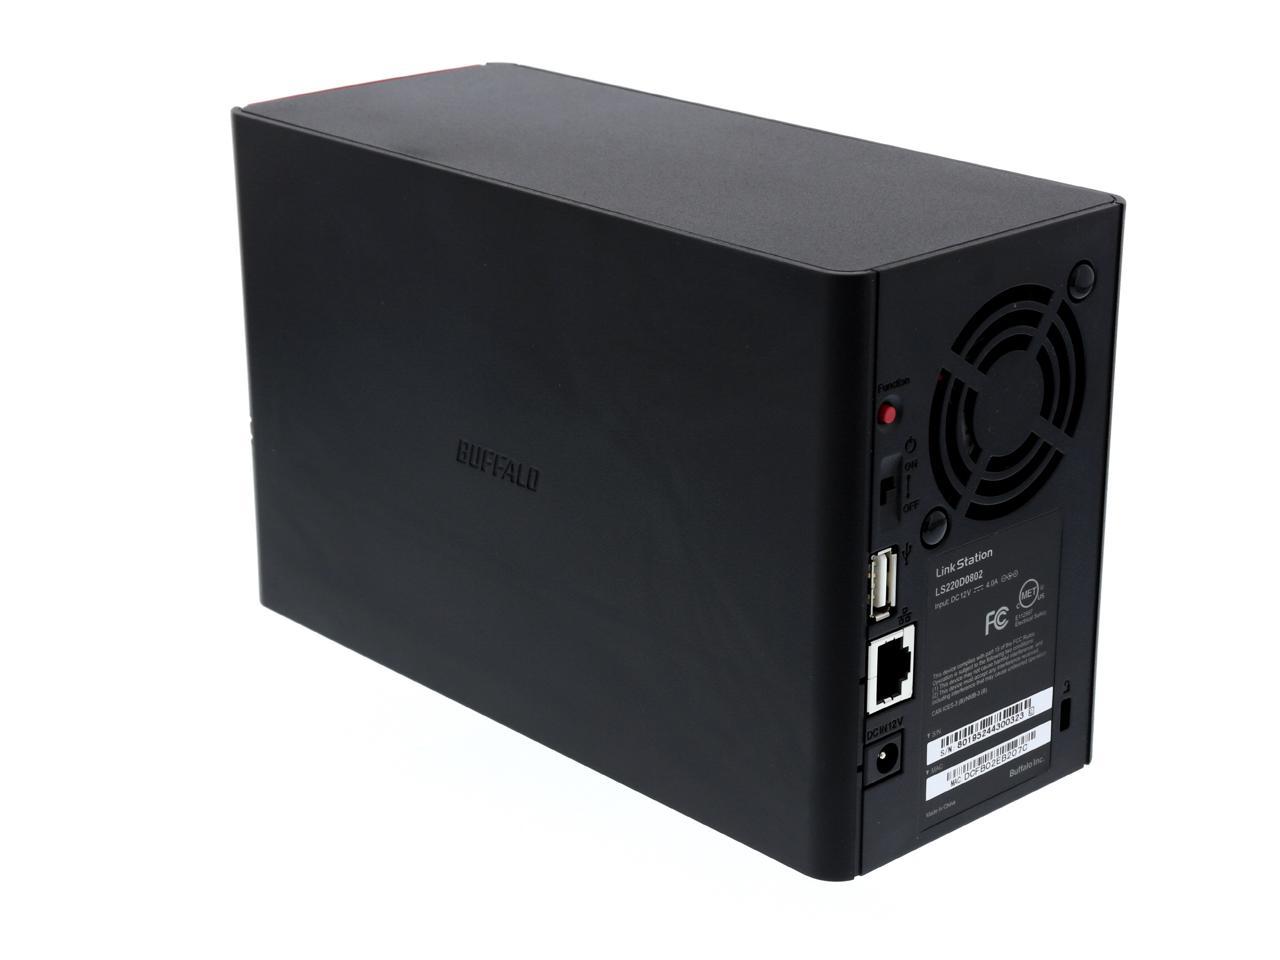 LinkStation 220 Personal Storage with Hard Drives Included (LS220D0802) - Newegg.com